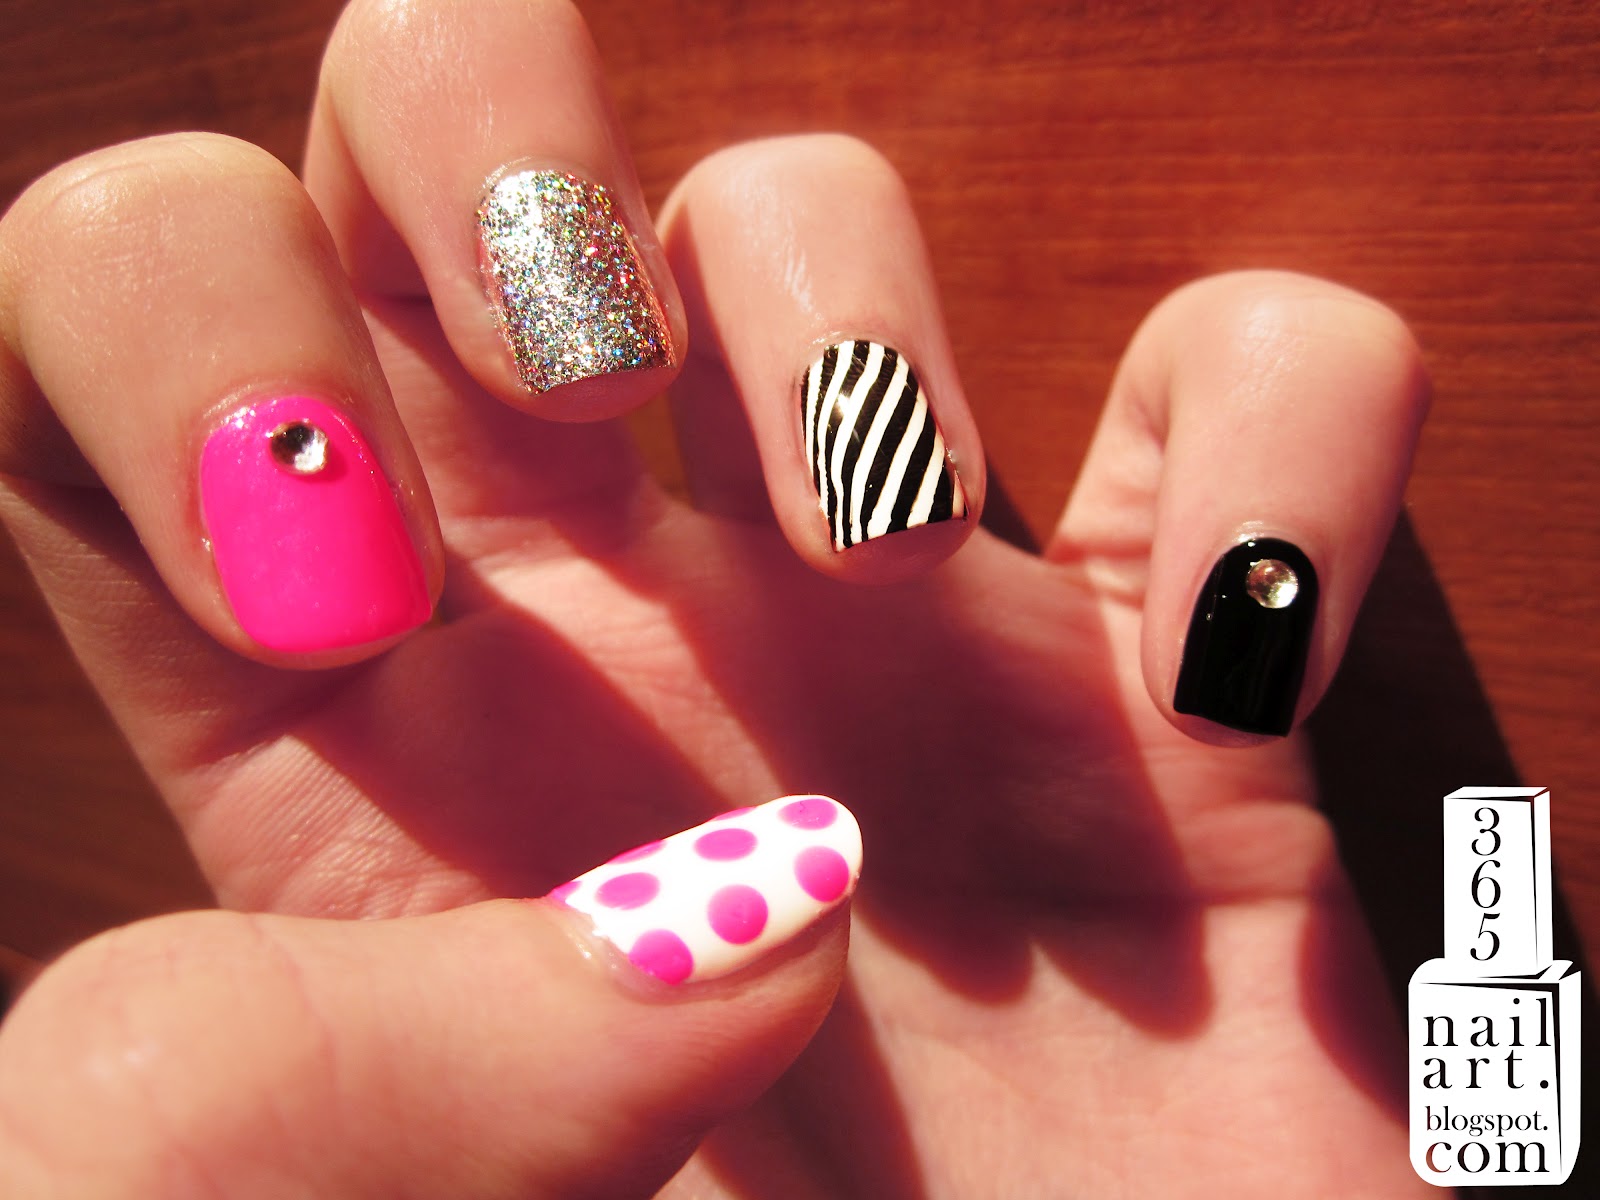 3. Acrylic Nail Designs - wide 2